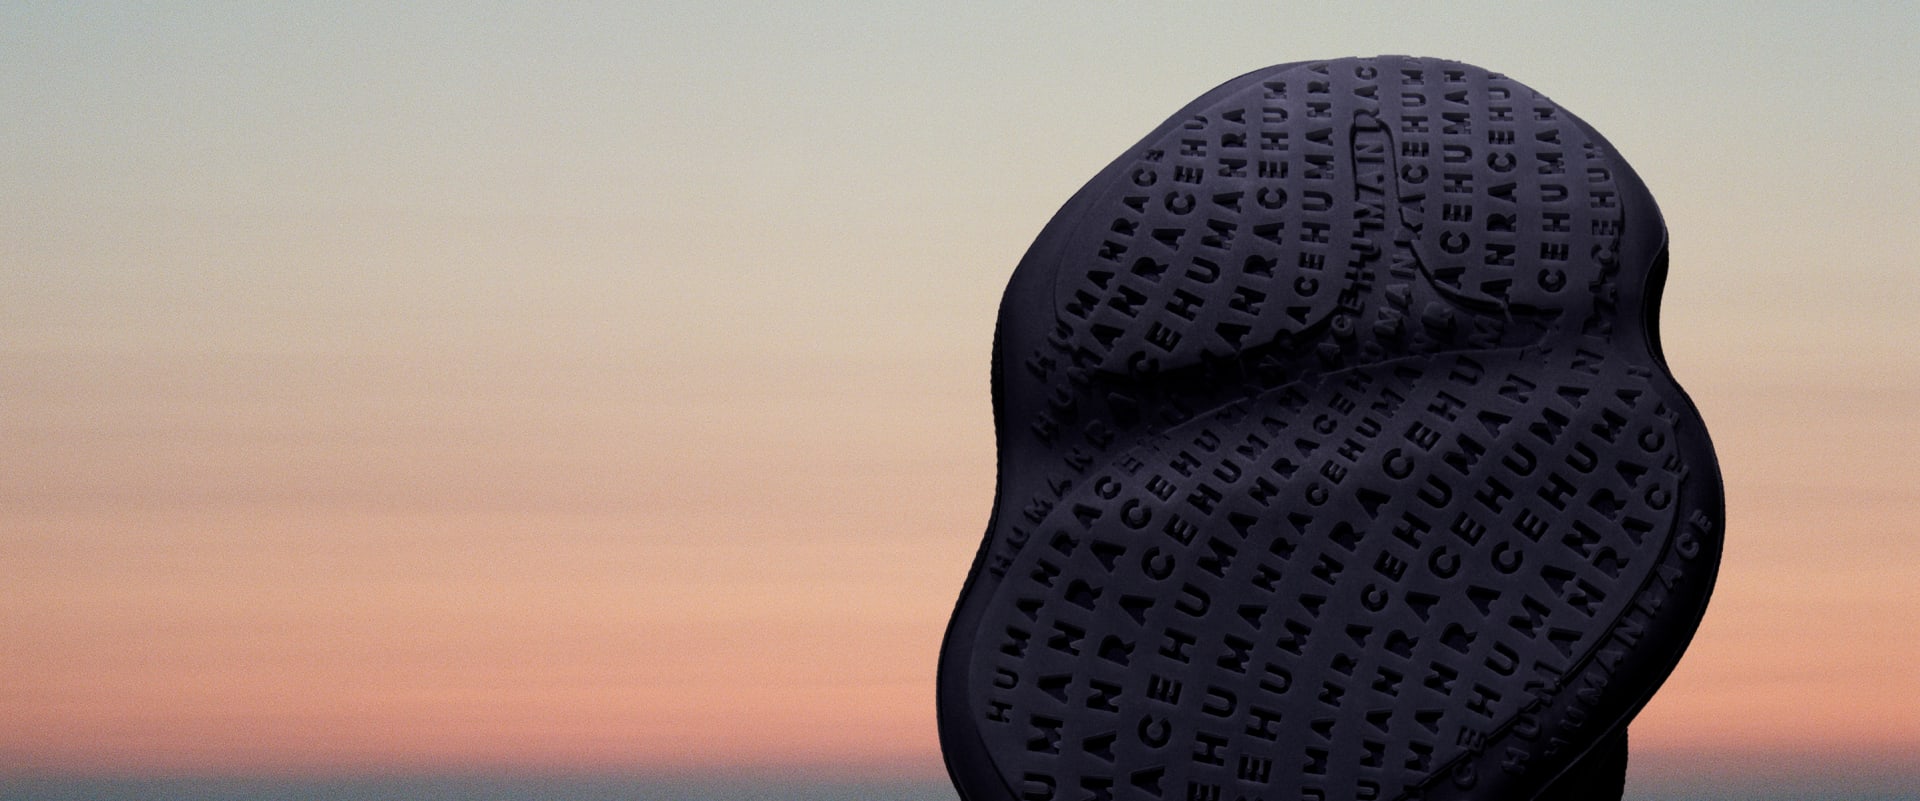 The outsole of a black Humanrace Sičhona shoe against the backdrop of a tinted sky.